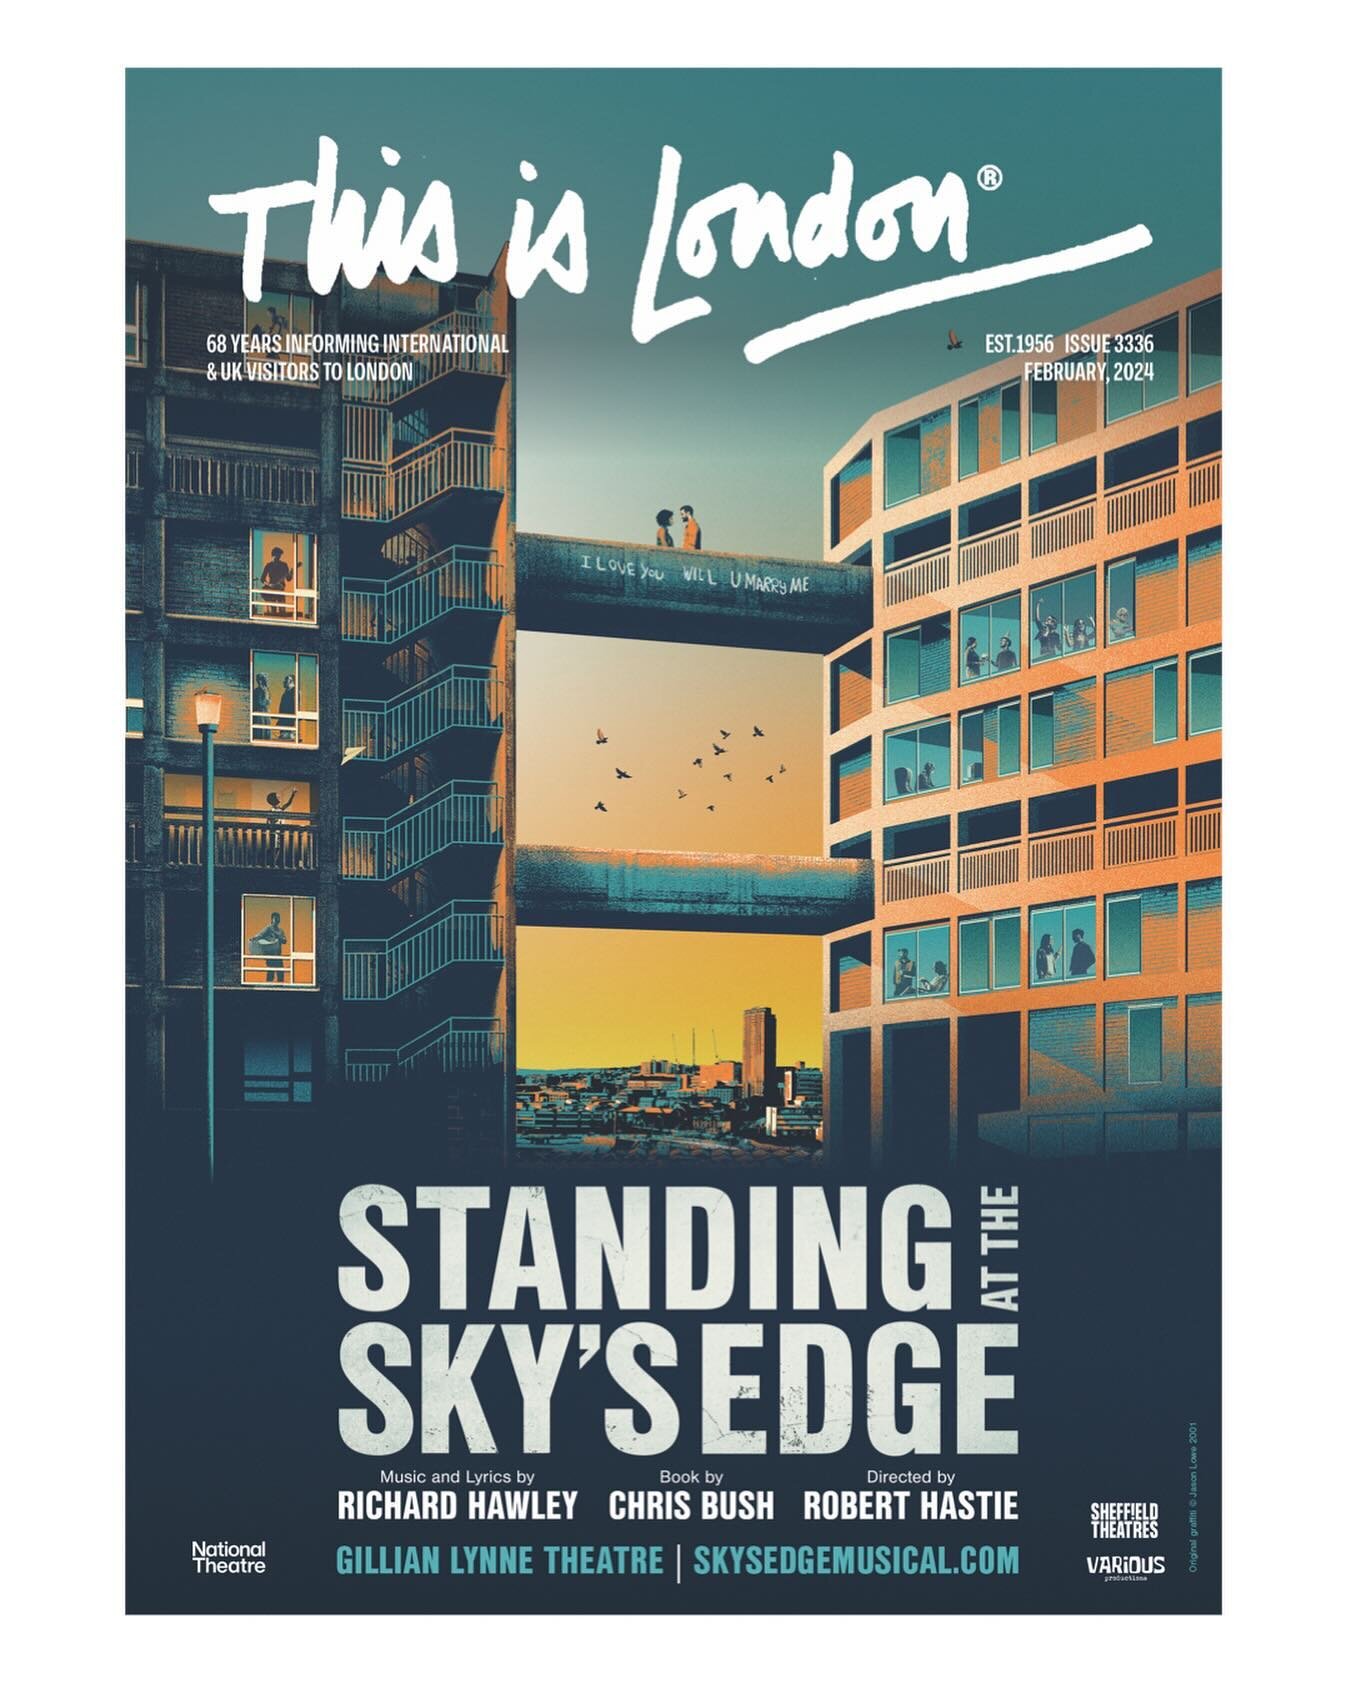 The latest issue of This is London Magazine is now available &ndash; visit www.til.com to read the magazine online, highlights will be posted @thisislondonmag every day!

This issue features the West End premiere of Standing at the Sky&rsquo;s Edge, 